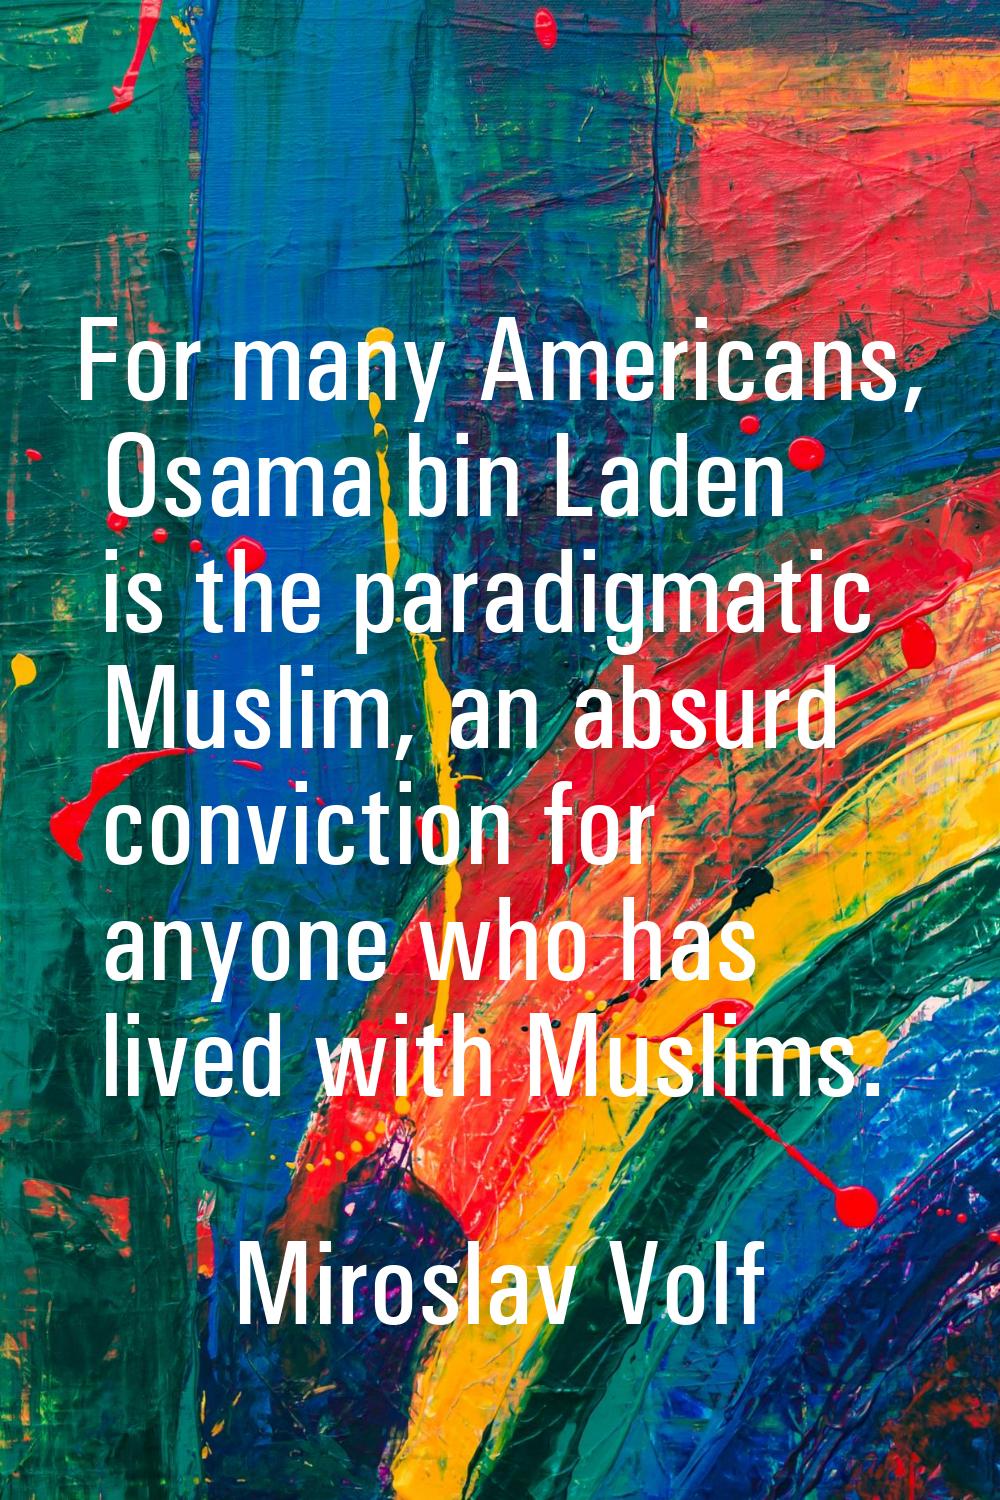 For many Americans, Osama bin Laden is the paradigmatic Muslim, an absurd conviction for anyone who